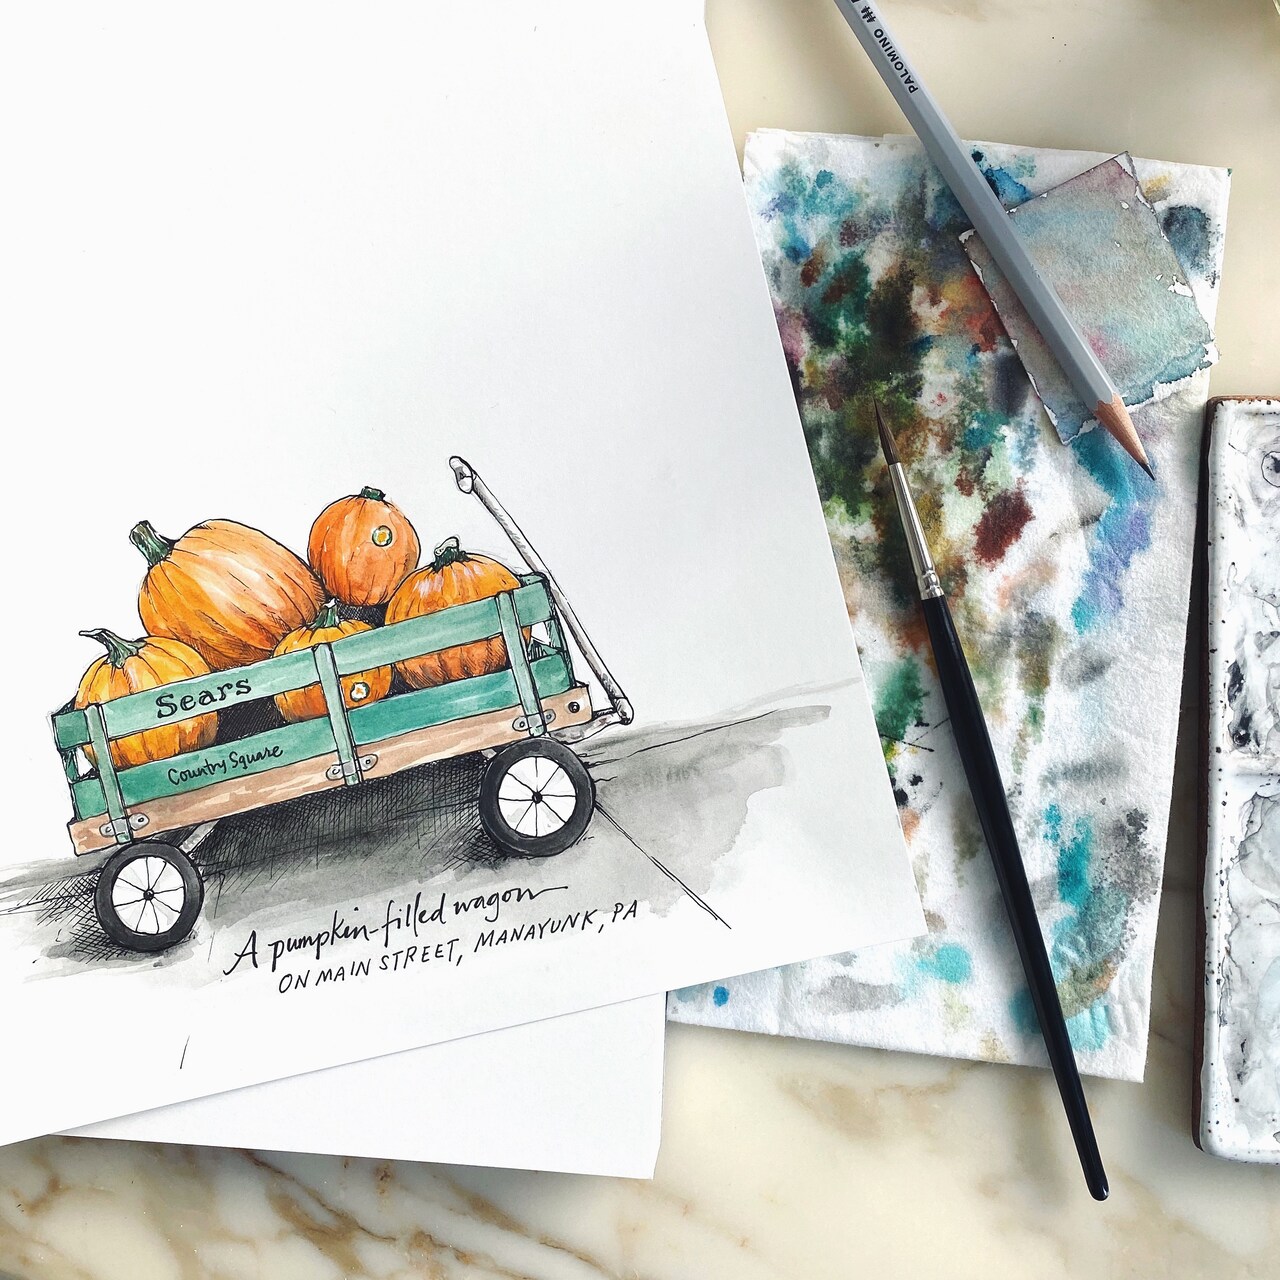 Painting Pumpkins and Gourds with Derwent Inktense Paints and Pencils